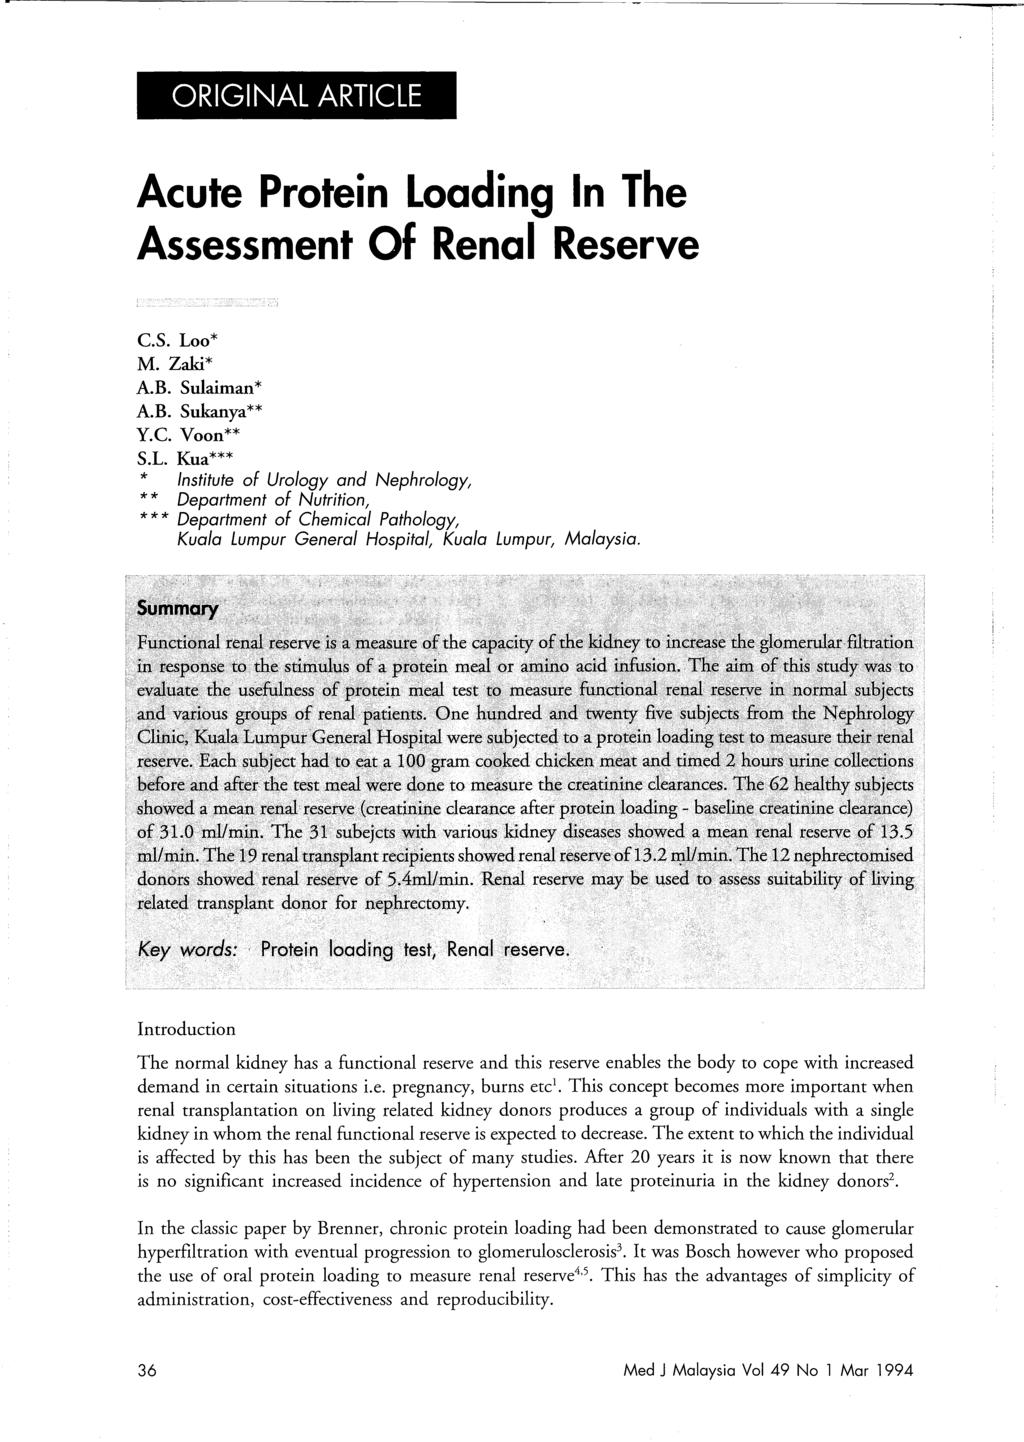 ORIGINAL ARTICLE Acute Protein Loading In The Assessment Of Renal Reserve C.S. Loo* M. Zaki* A.B. Sulaiman* A.B. Sukanya** Y.c. Voon** S.L. Kua*** * Institute of Urology and Nephrology, * * Department of Nutrition, * * * Department of Chemical Pathology, Kuala Lumpur General Hospital, Kuala Lumpur, Malaysia.